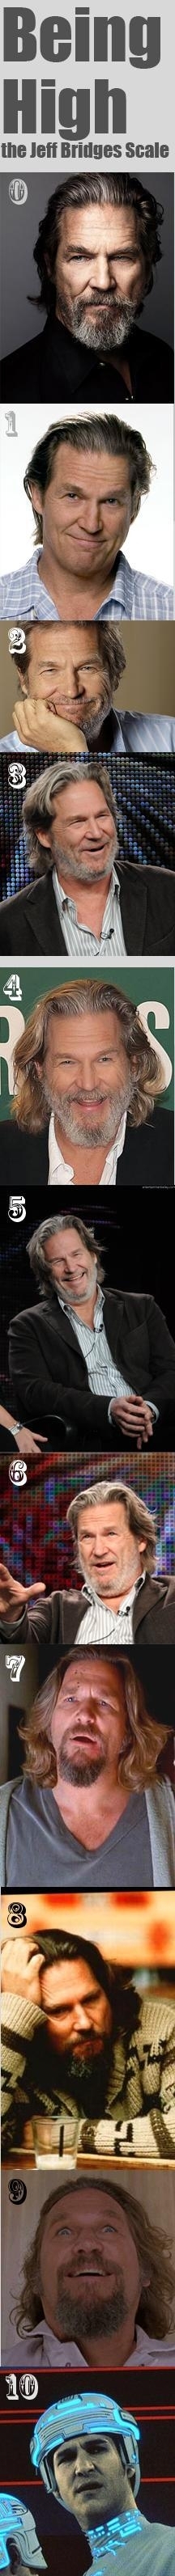 The Jeff Bridges high scale xpost rtrees